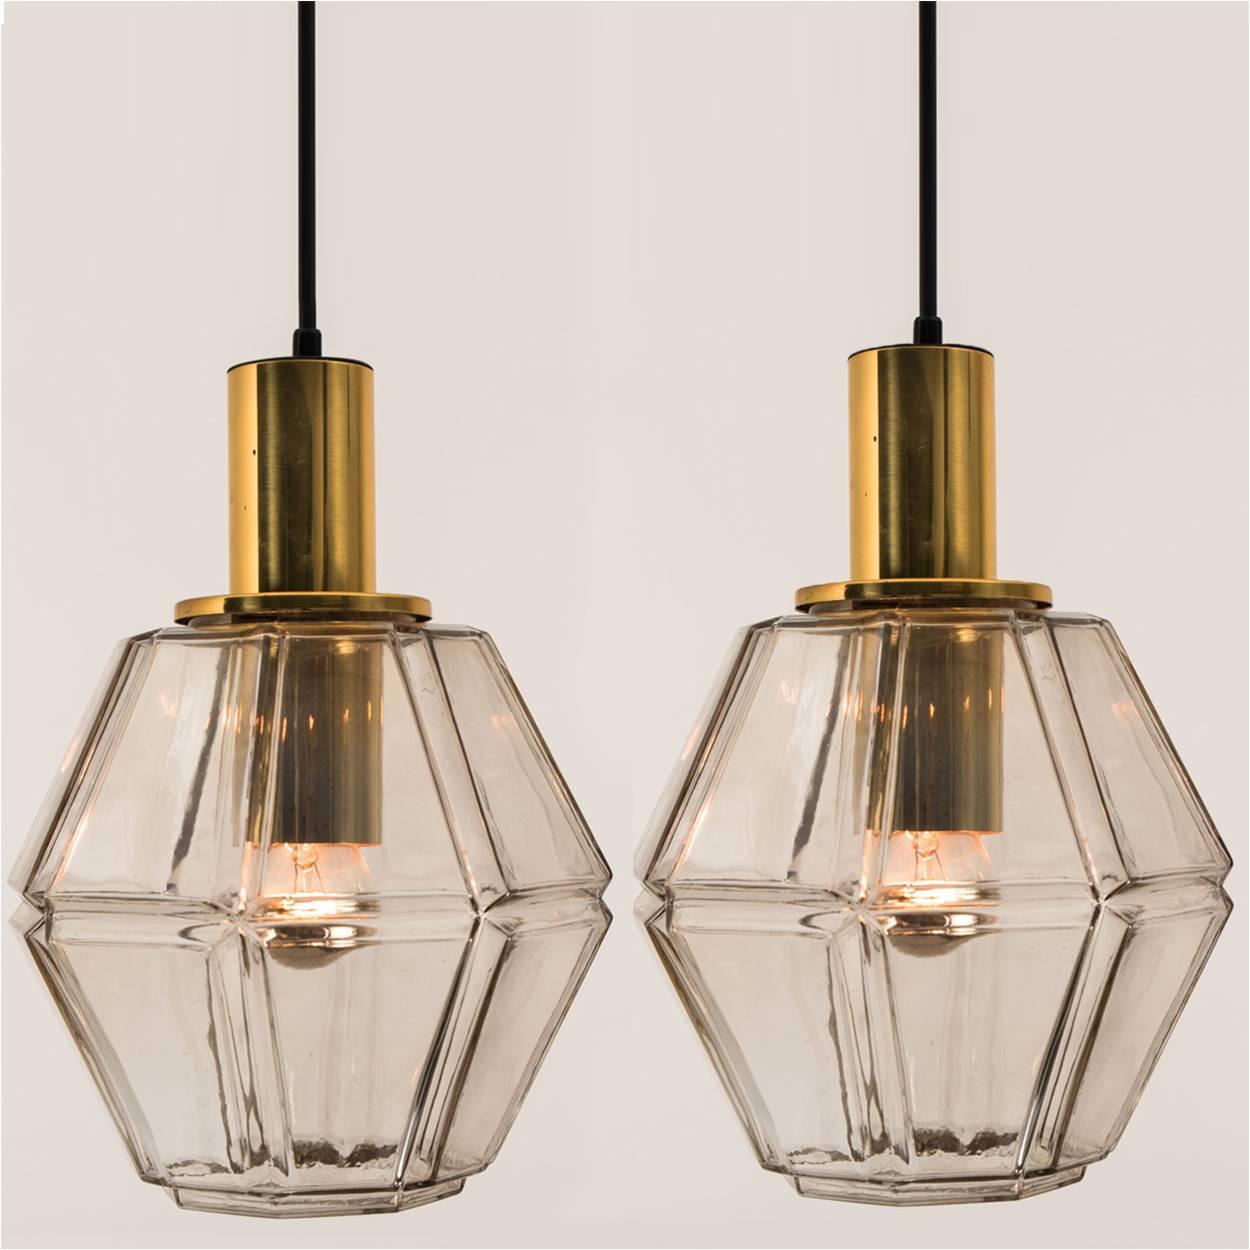 1 of the 3 Geometric Brass and Clear Glass Pendant Lights by Limburg, 1960 For Sale 2